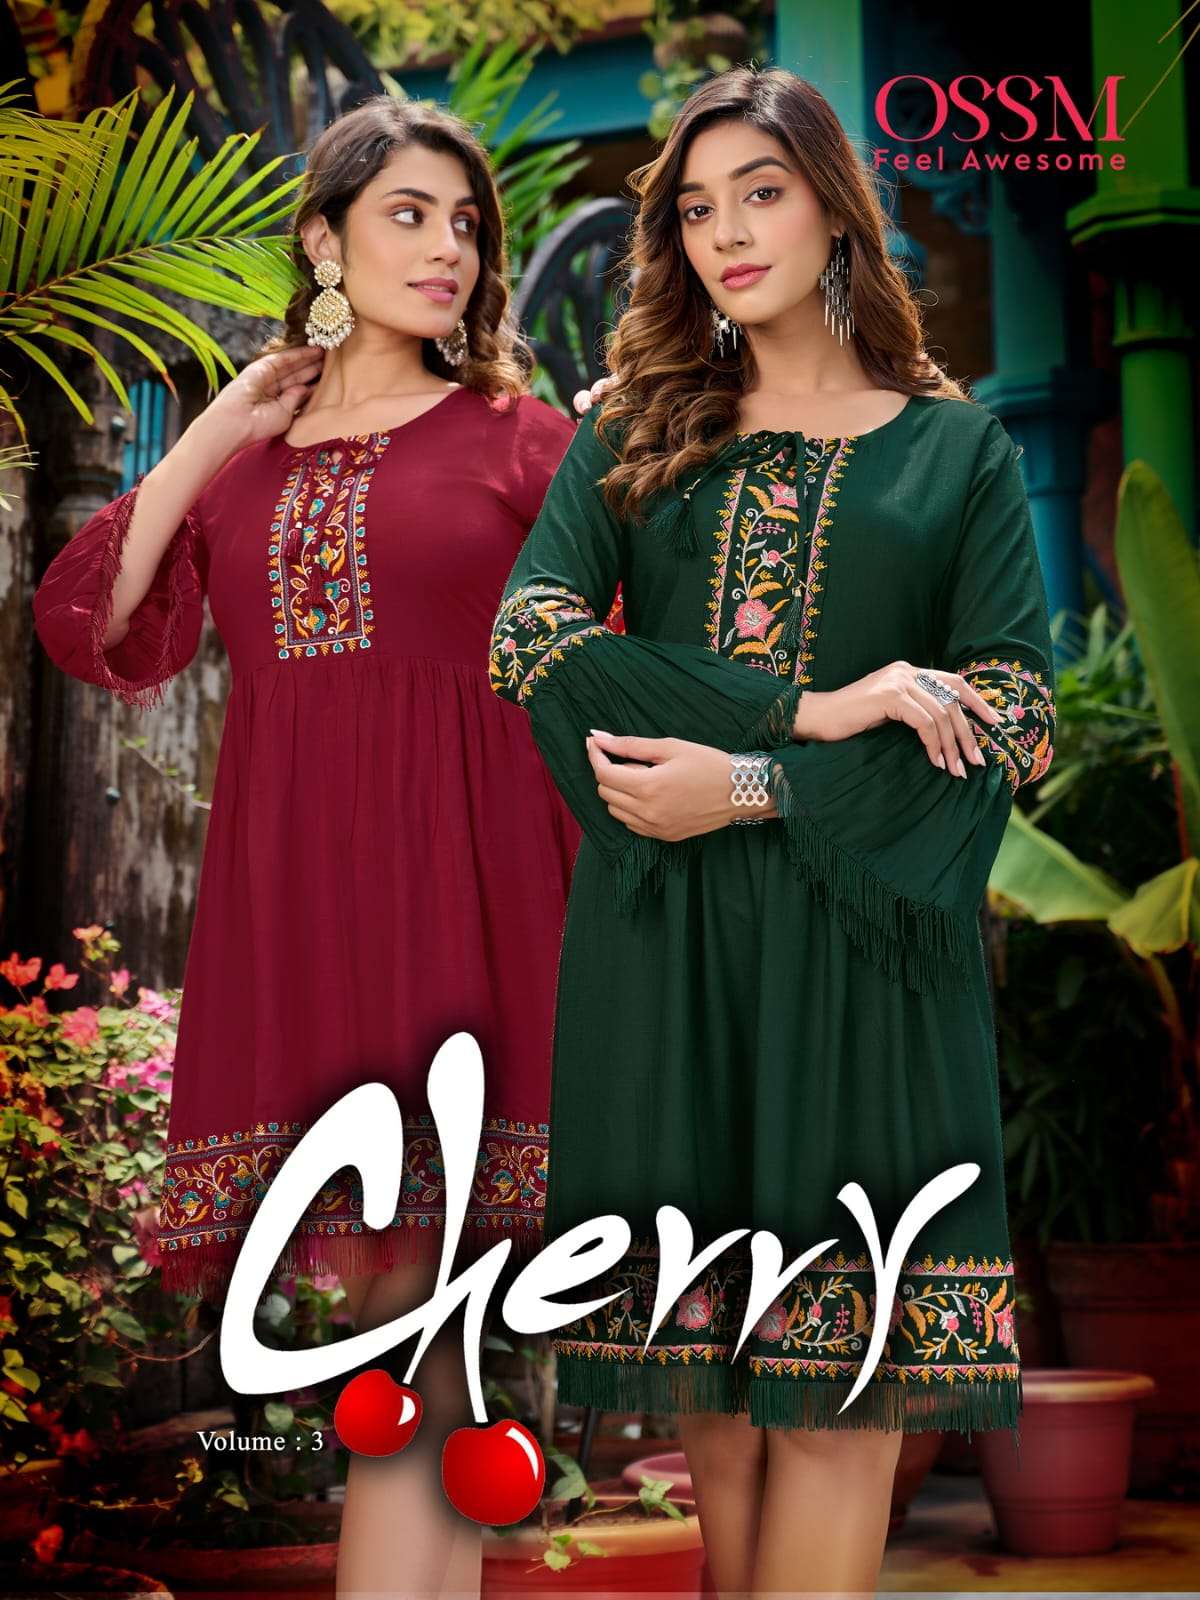 Ossm By Cherry Western Wear Rayon Tops Catalogue Set